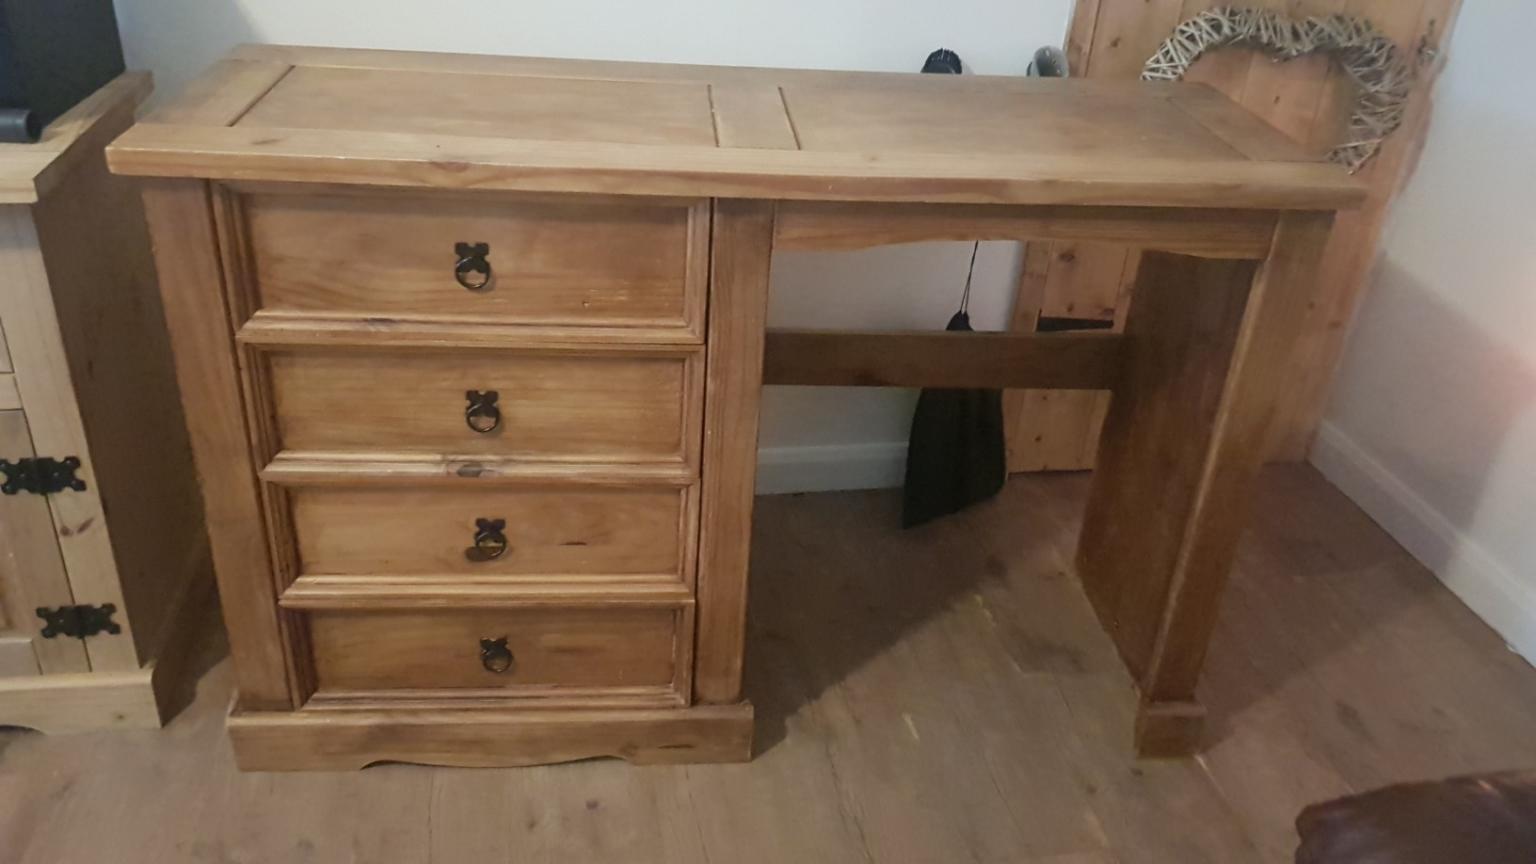 Mexican Pine Desk In Rother For 50 00 For Sale Shpock